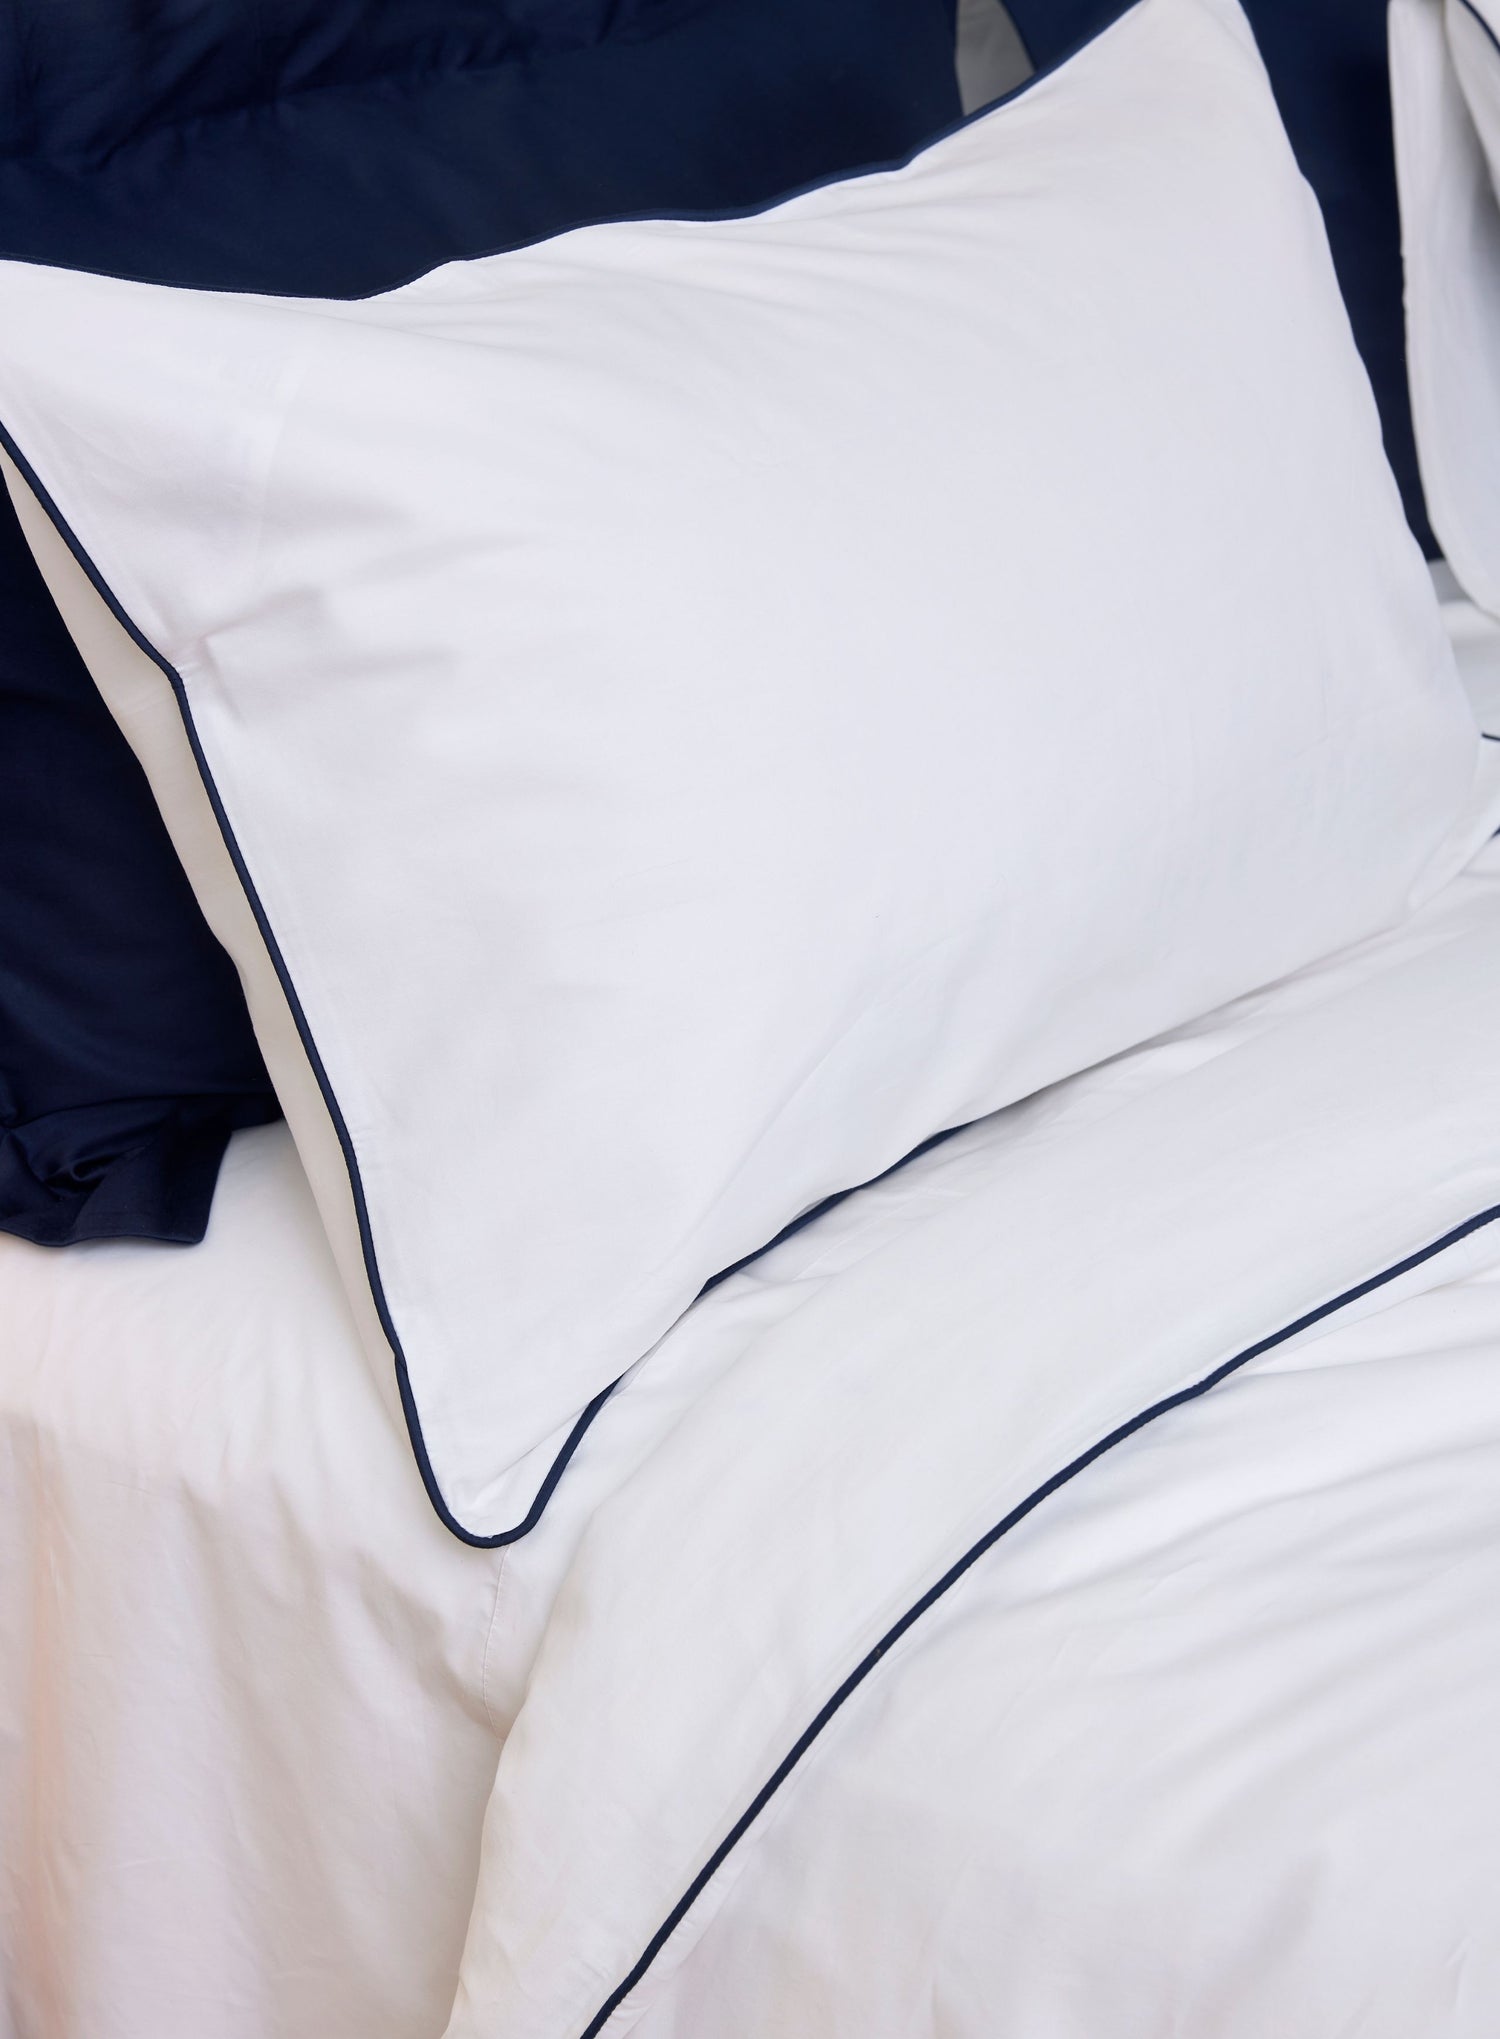 Navy Piped Edge - Duvet cover + Pillowcases | 100% Organic Certified Cotton